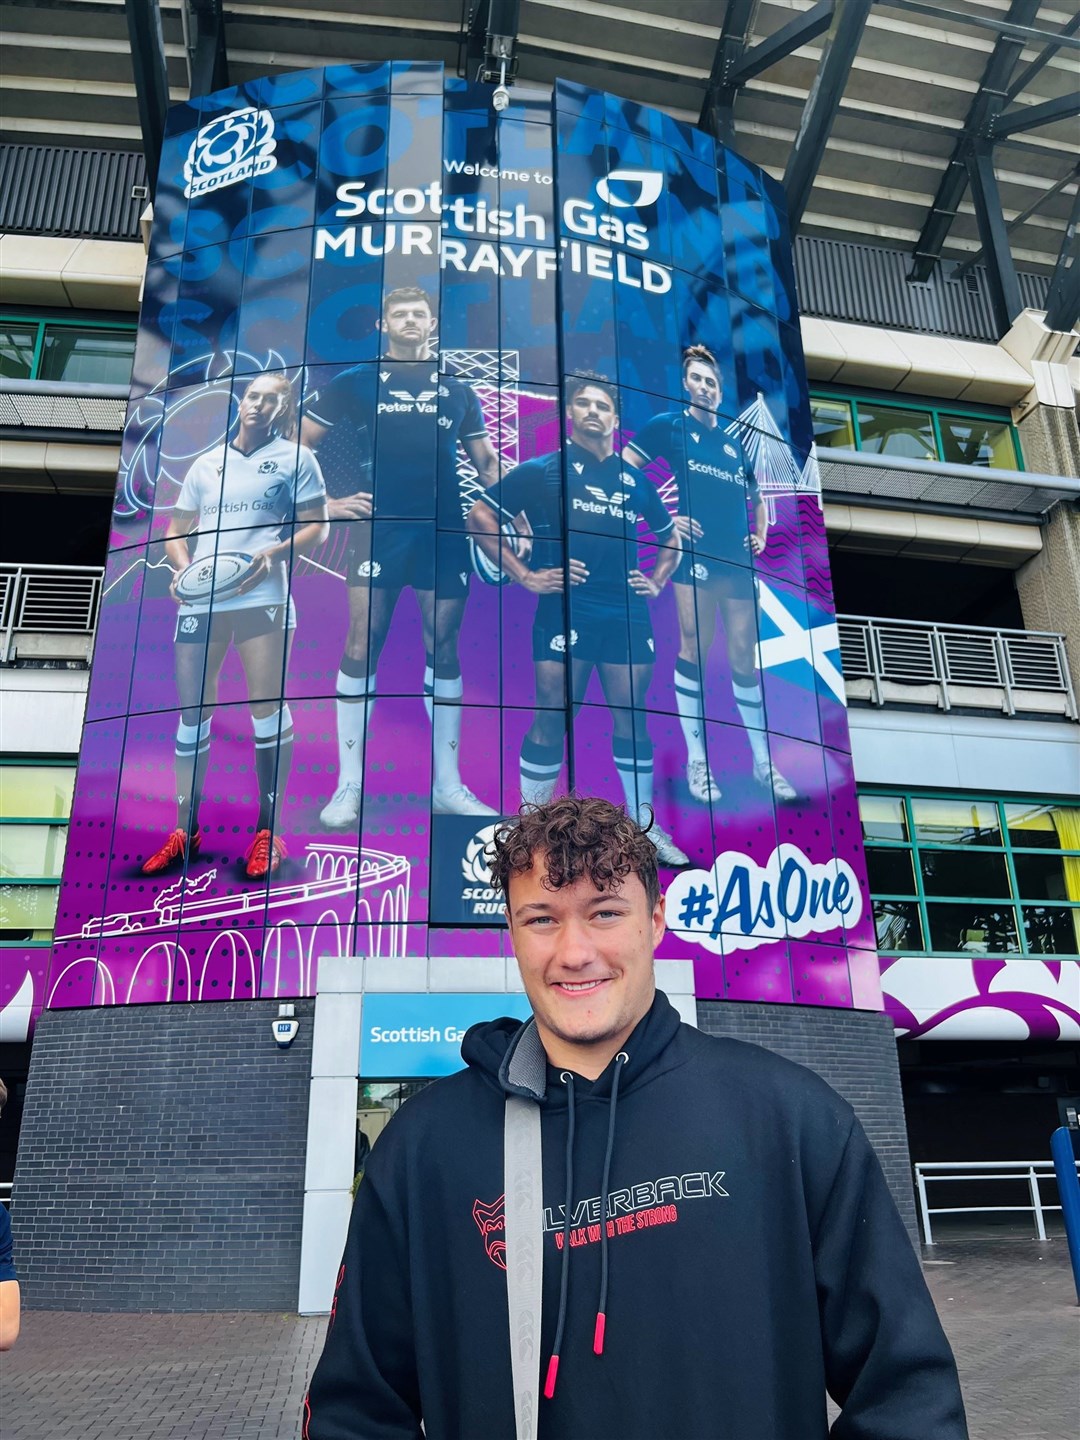 Toby Haworth pictured during his recent visit to Murrayfield.